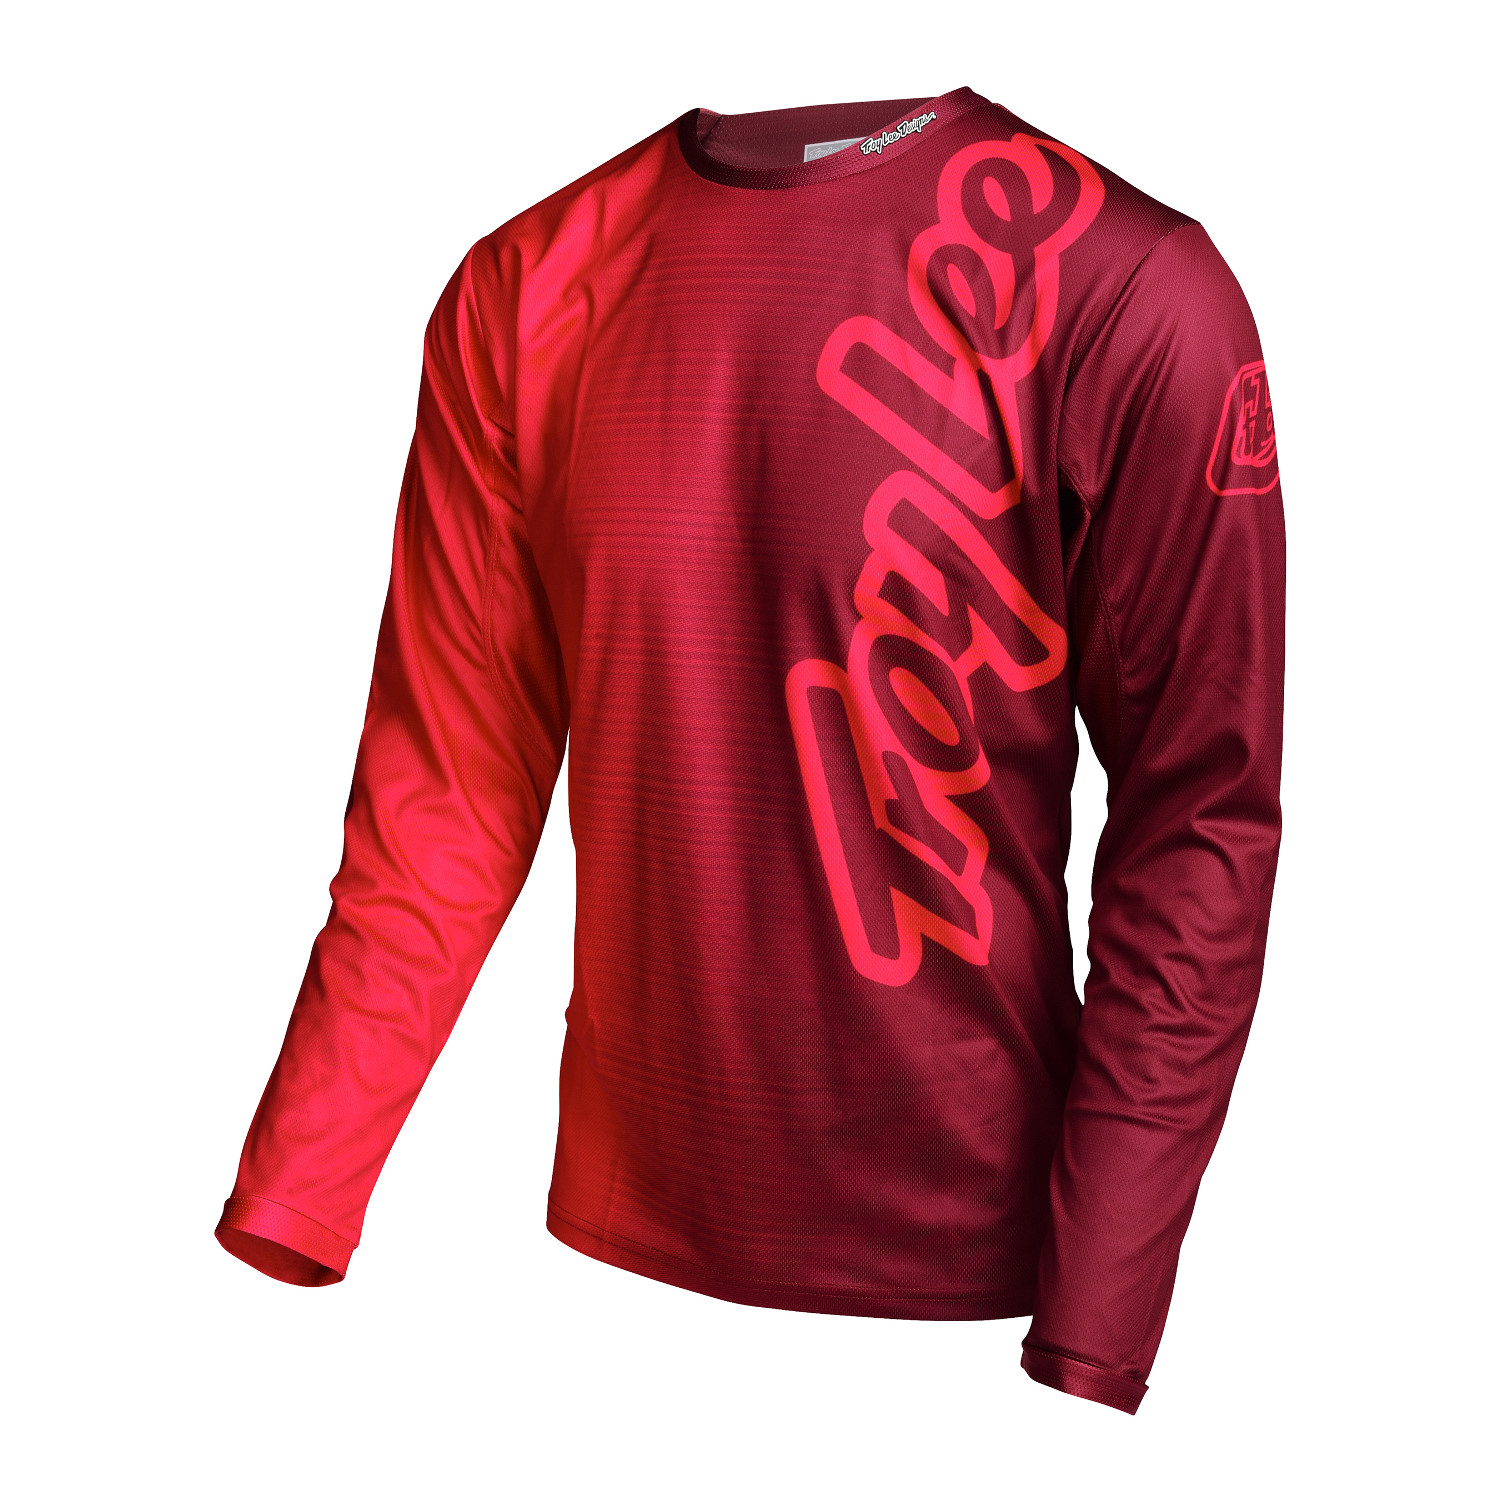 Troy Lee Designs Downhill-Jersey Sprint 50/50 - Rot